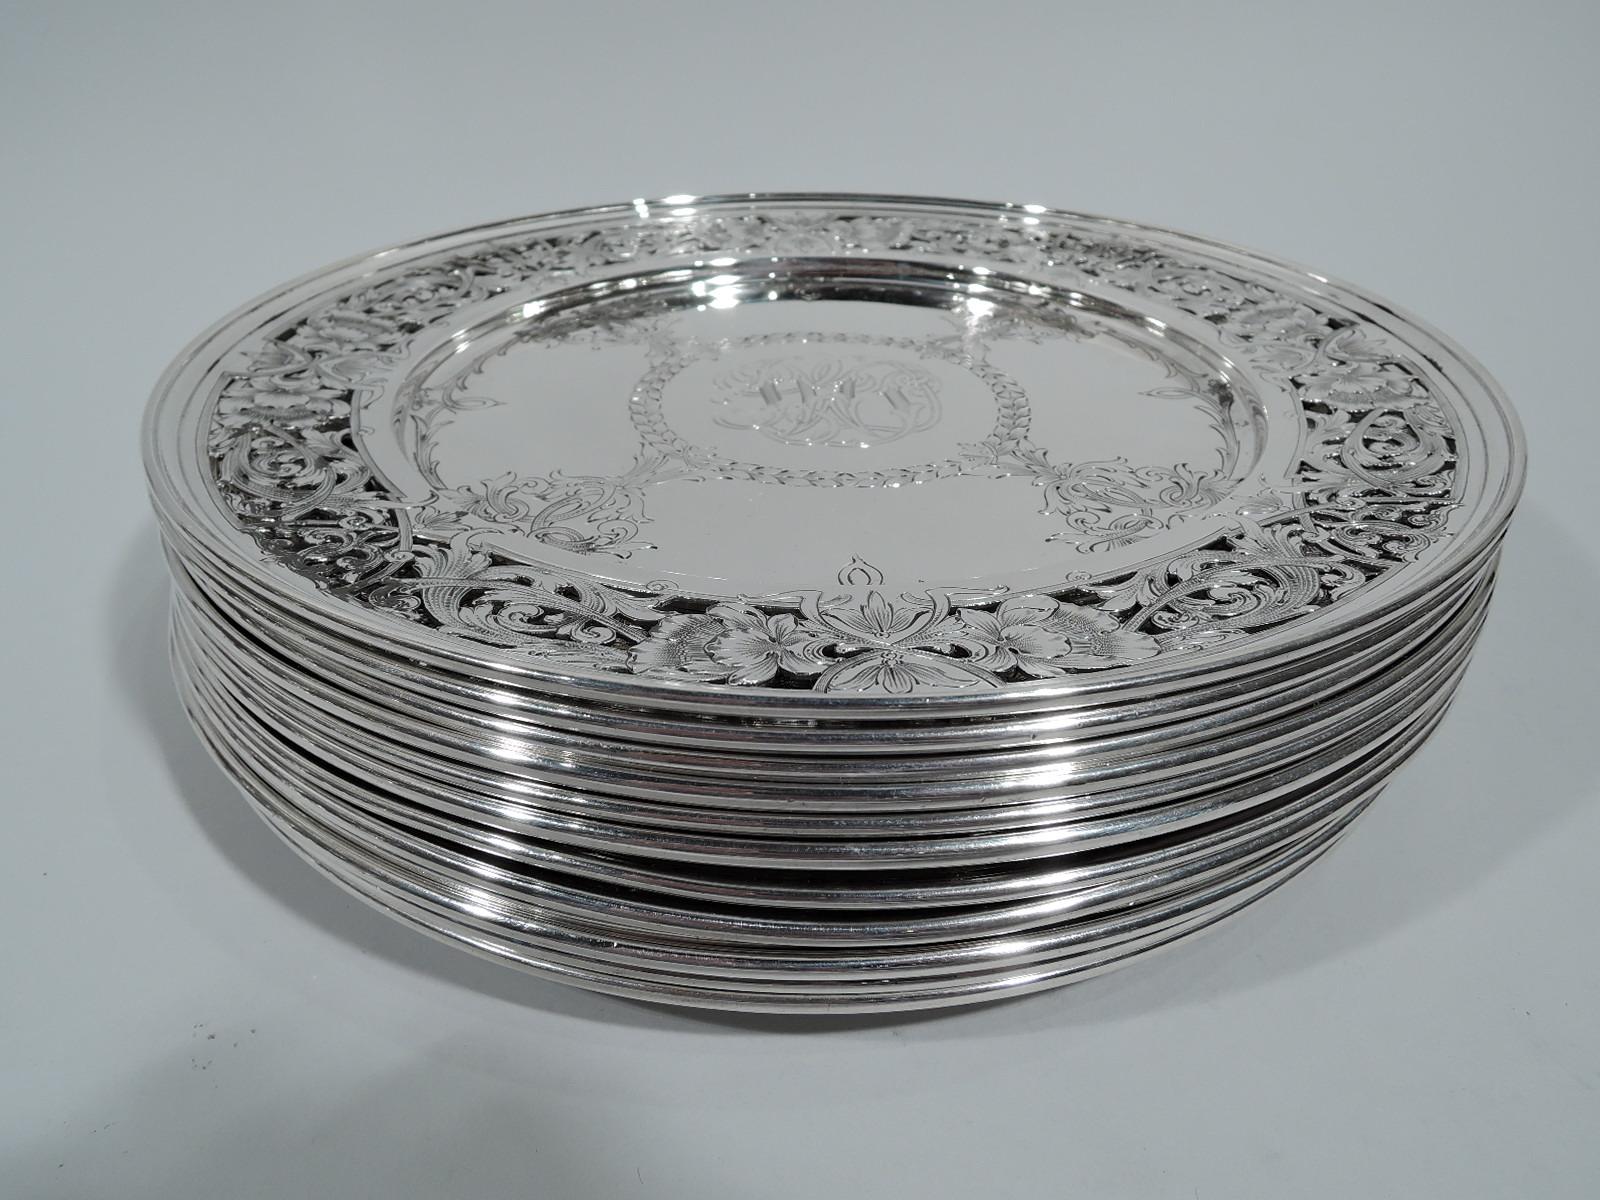 Twelve American Edwardian Art Nouveau sterling silver dinner plates. Each: Round and solid well engraved with interlaced monogram set in wreath surrounded by four interlaced leafing C-scrolls. Pierced shoulder with engraved flowers and scrolling